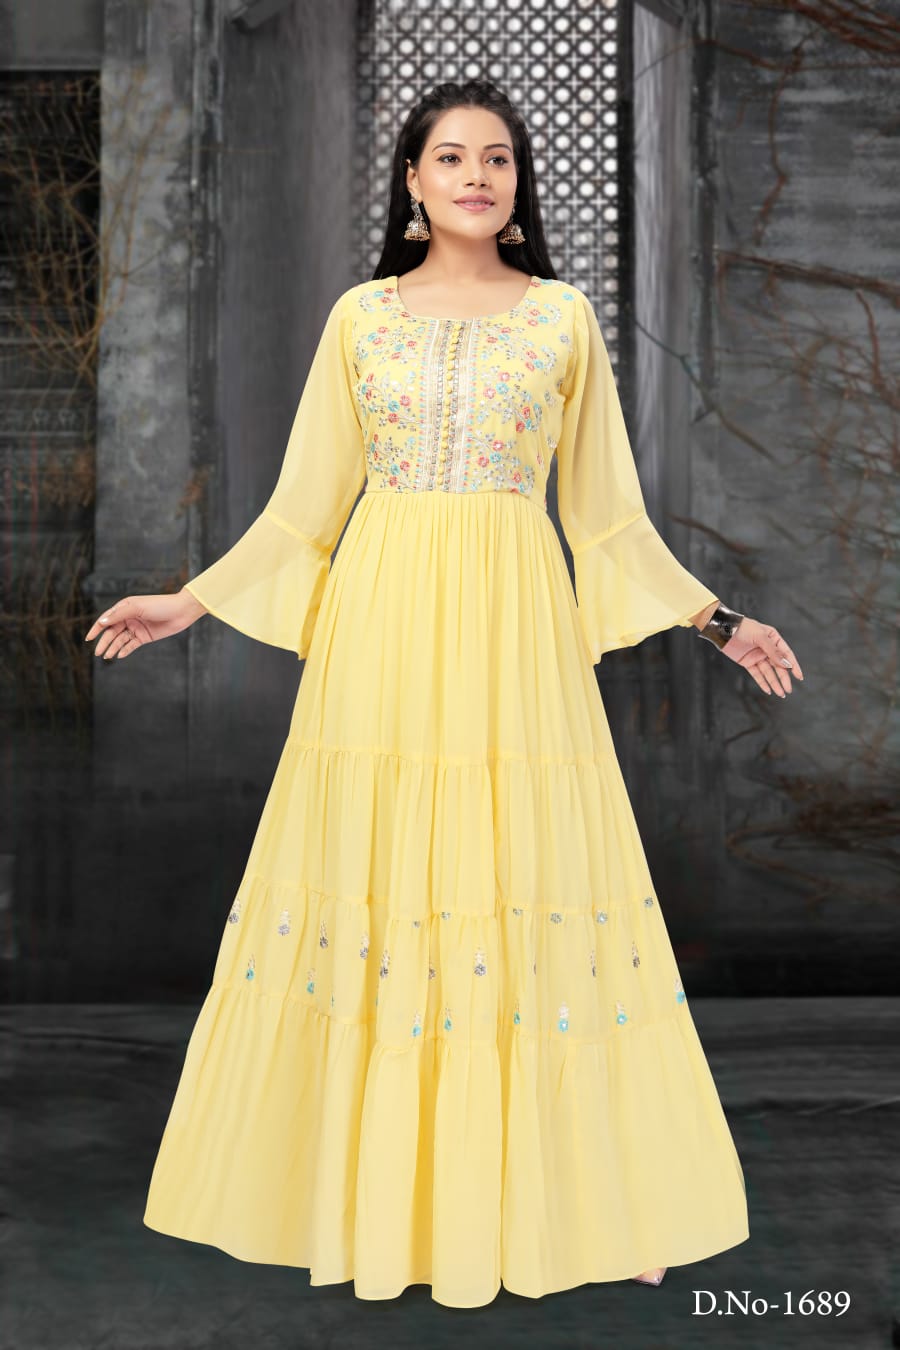 Aggregate more than 79 floor length indo western gowns